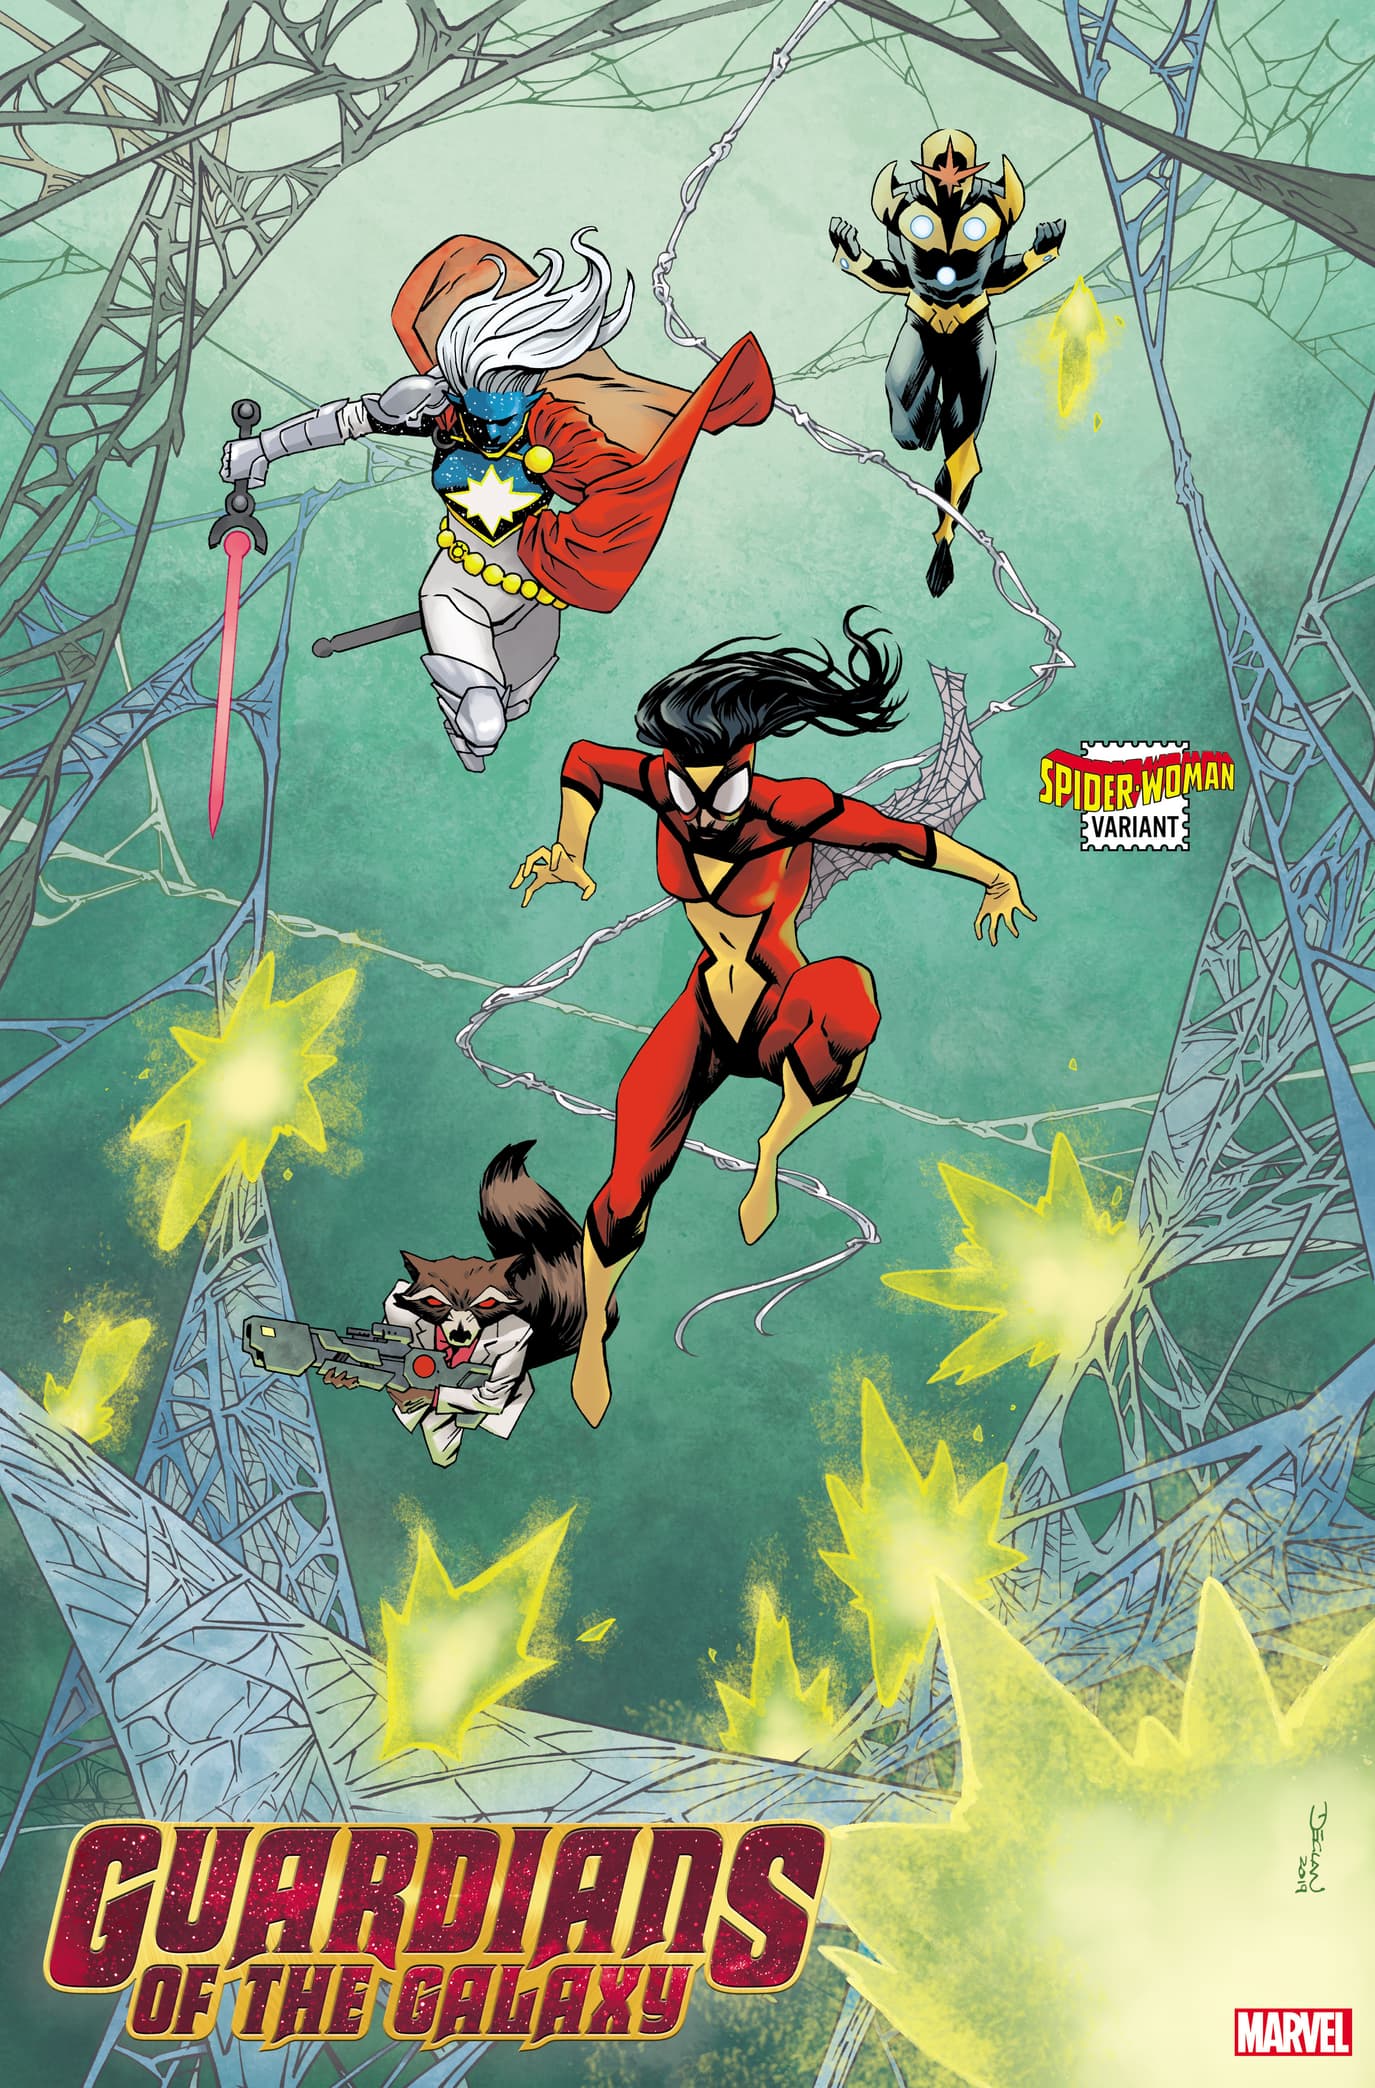 GUARDIANS OF THE GALAXY #3 SPIDER-WOMAN VARIANT by DECLAN SHALVEY